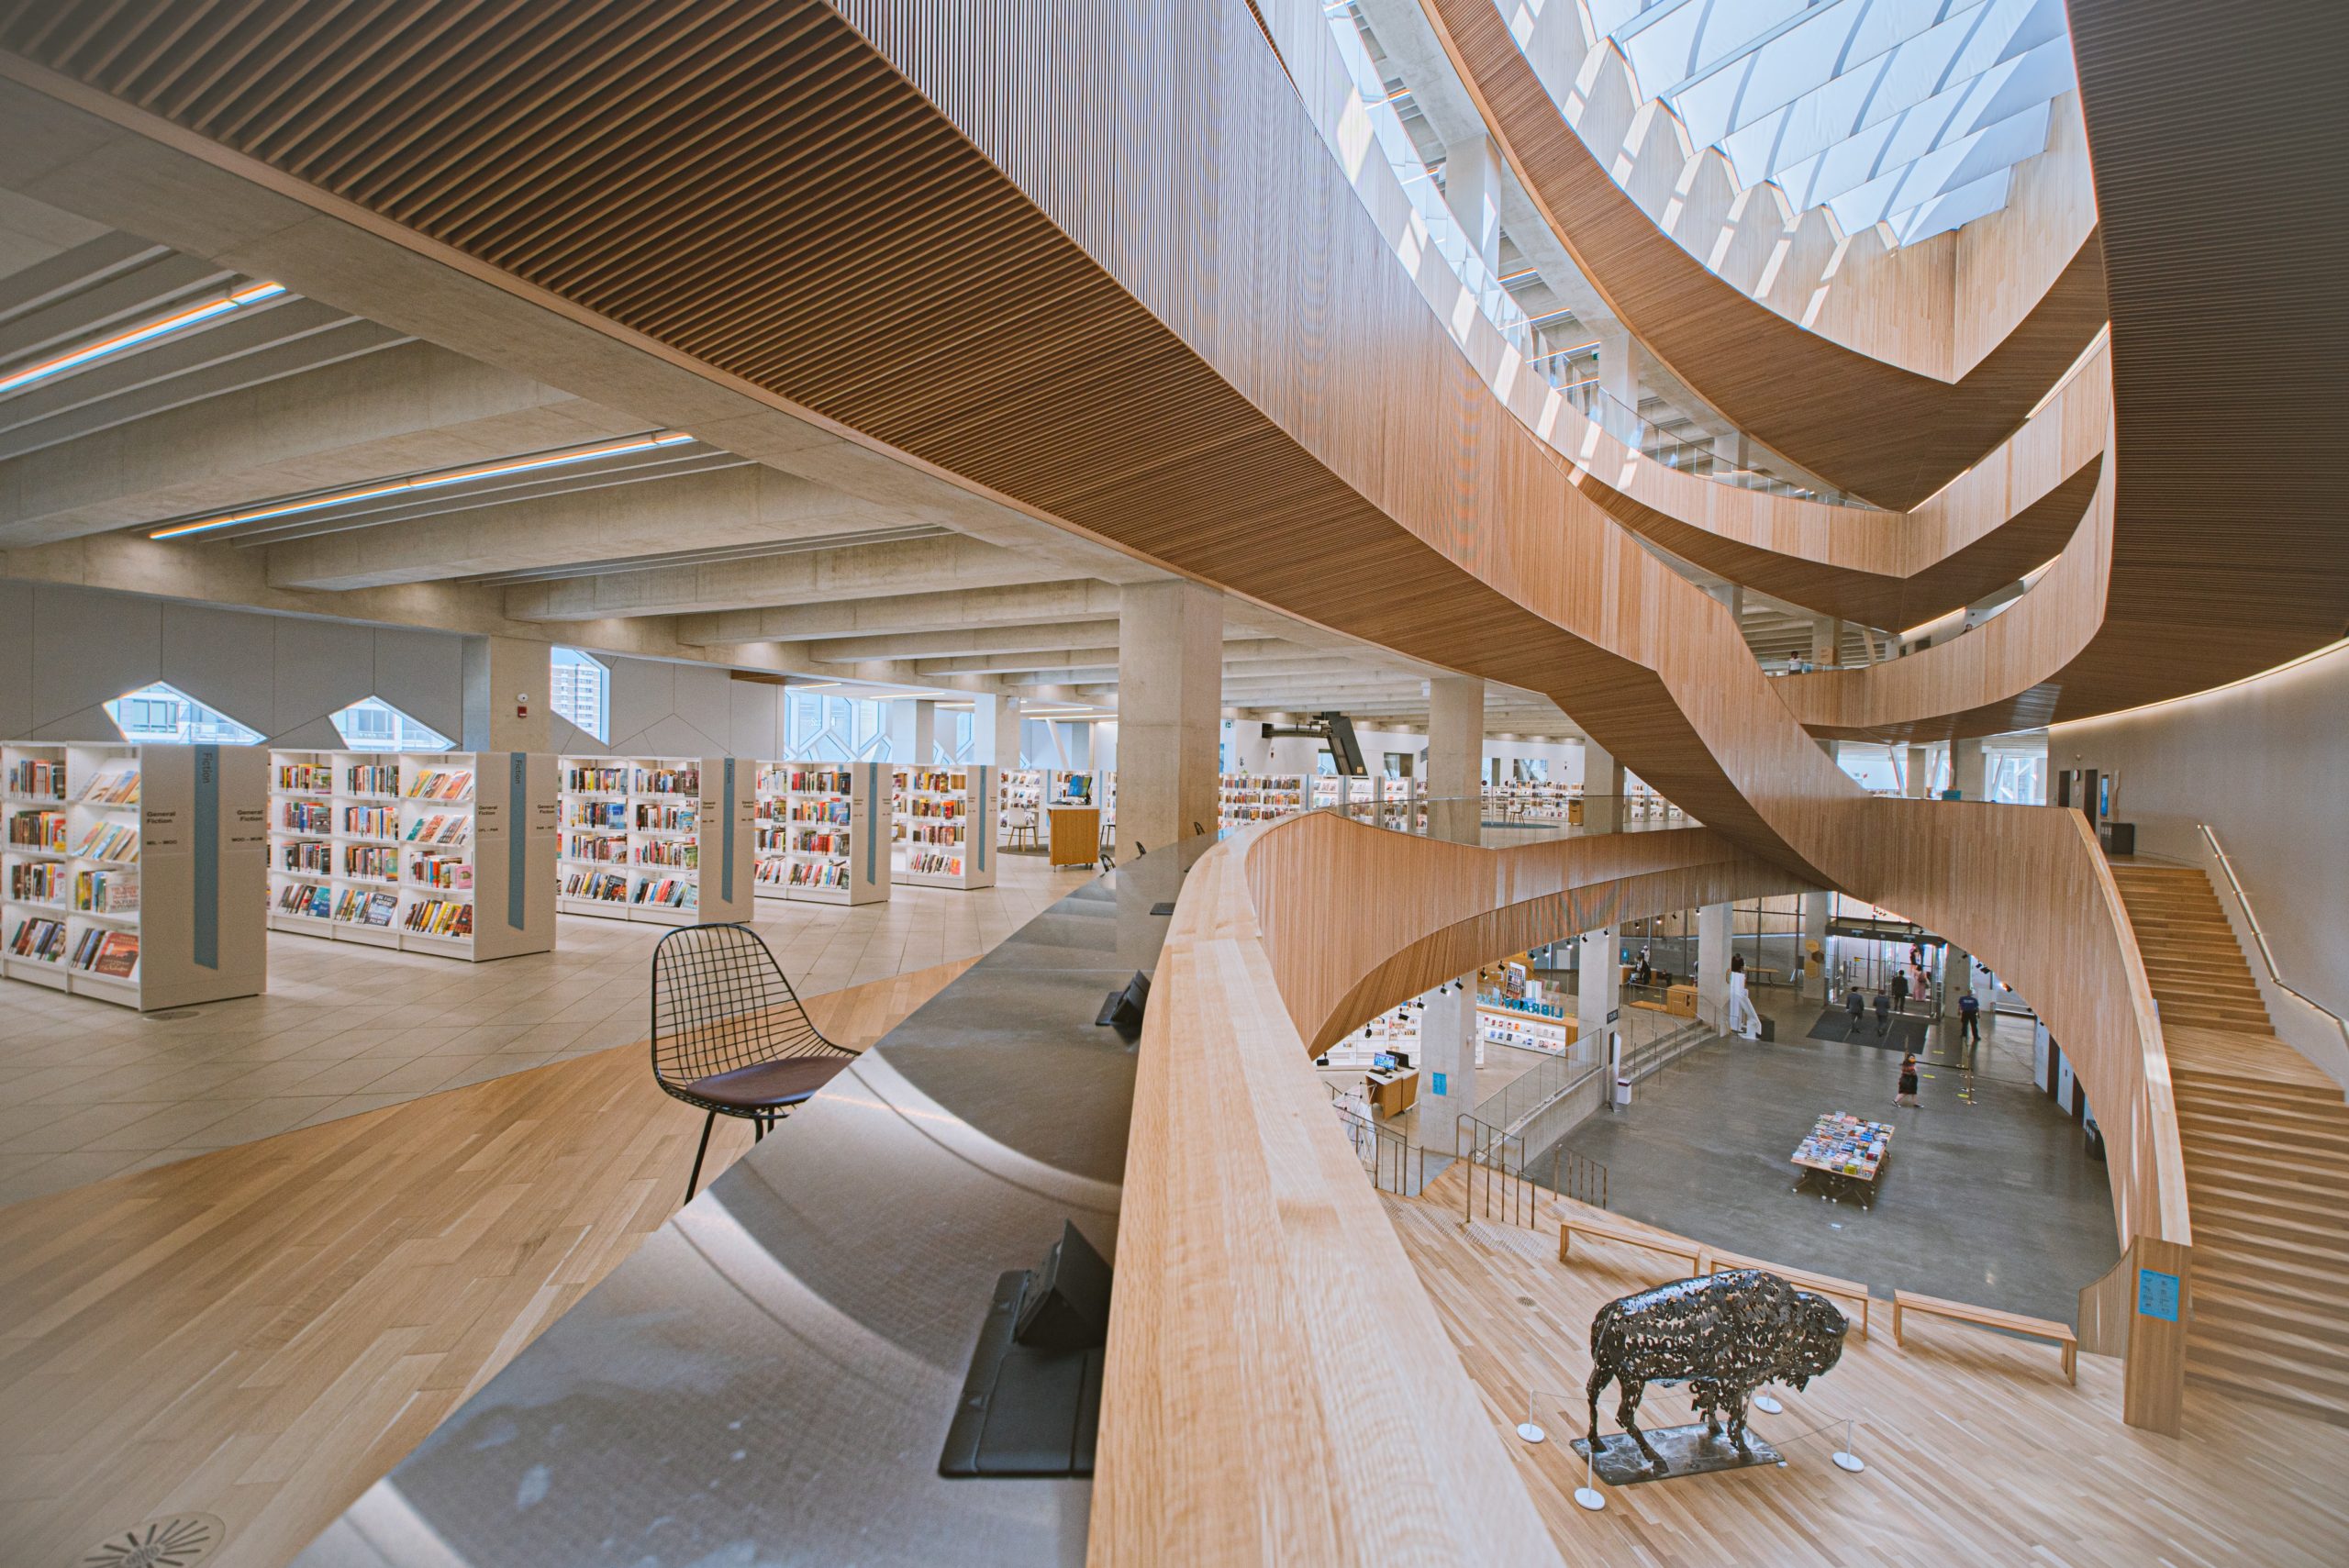 Interior view of the Calgary Public Library featuring work by Lionel Peyachew